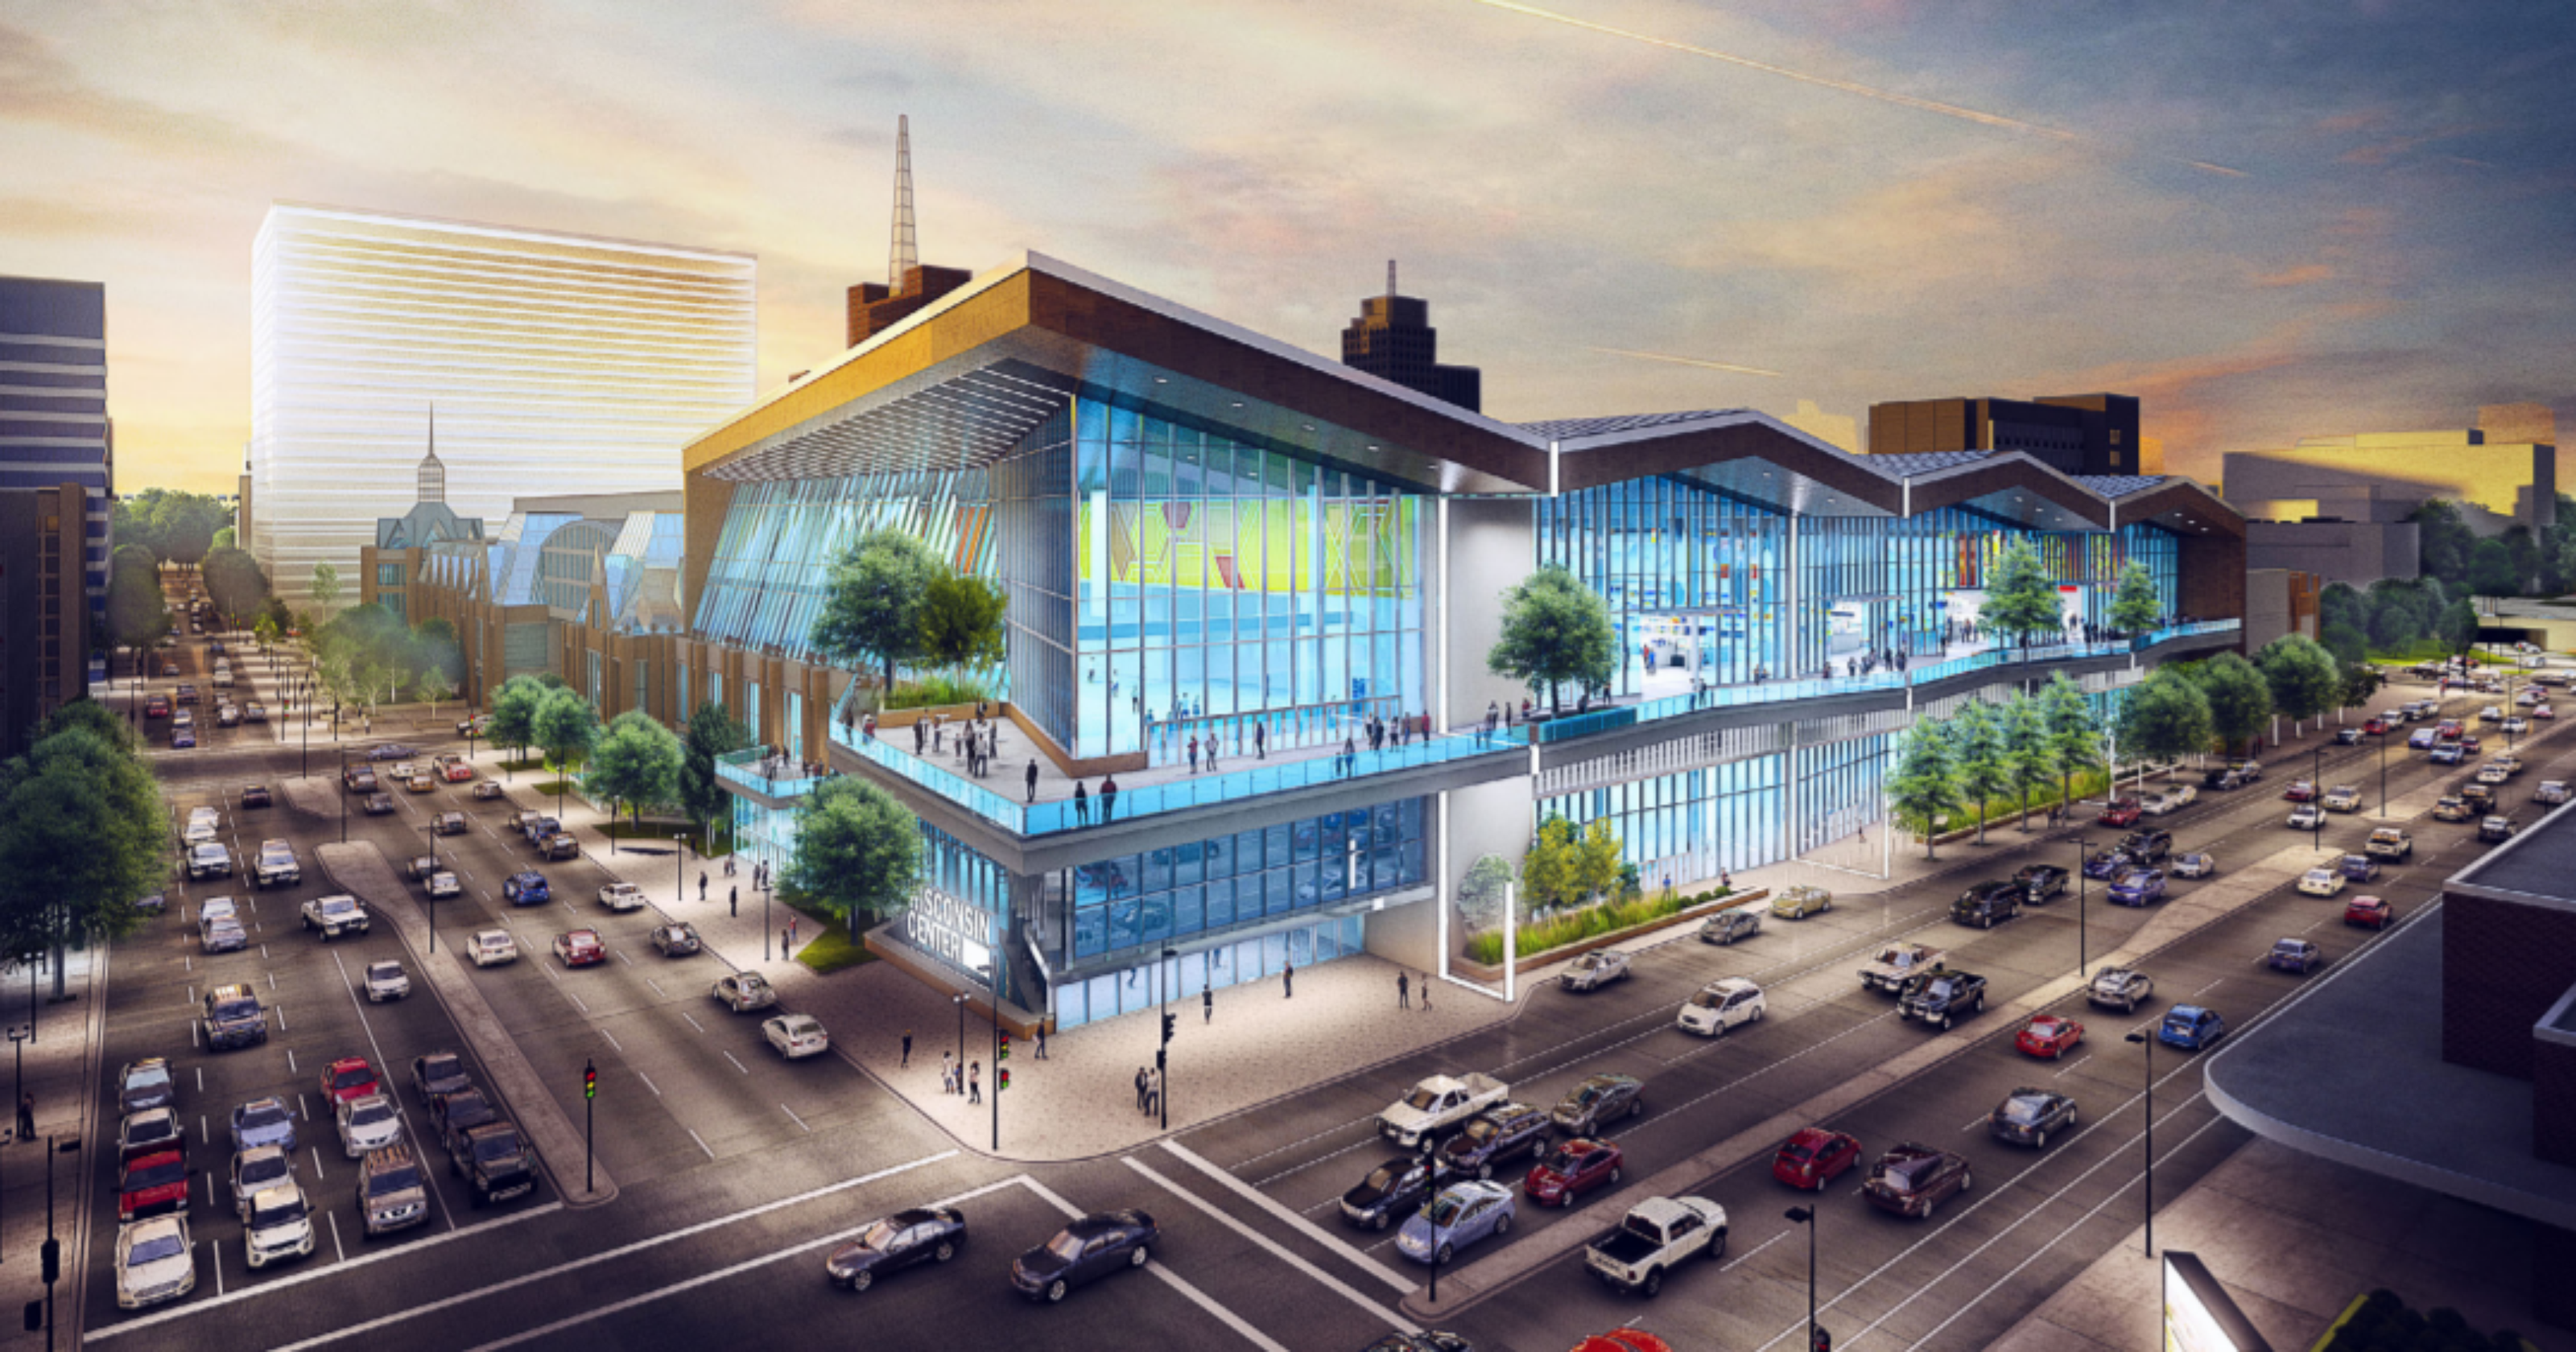 Proposed Meadowlands Convention Center Poised to Boost New Jersey's Draw